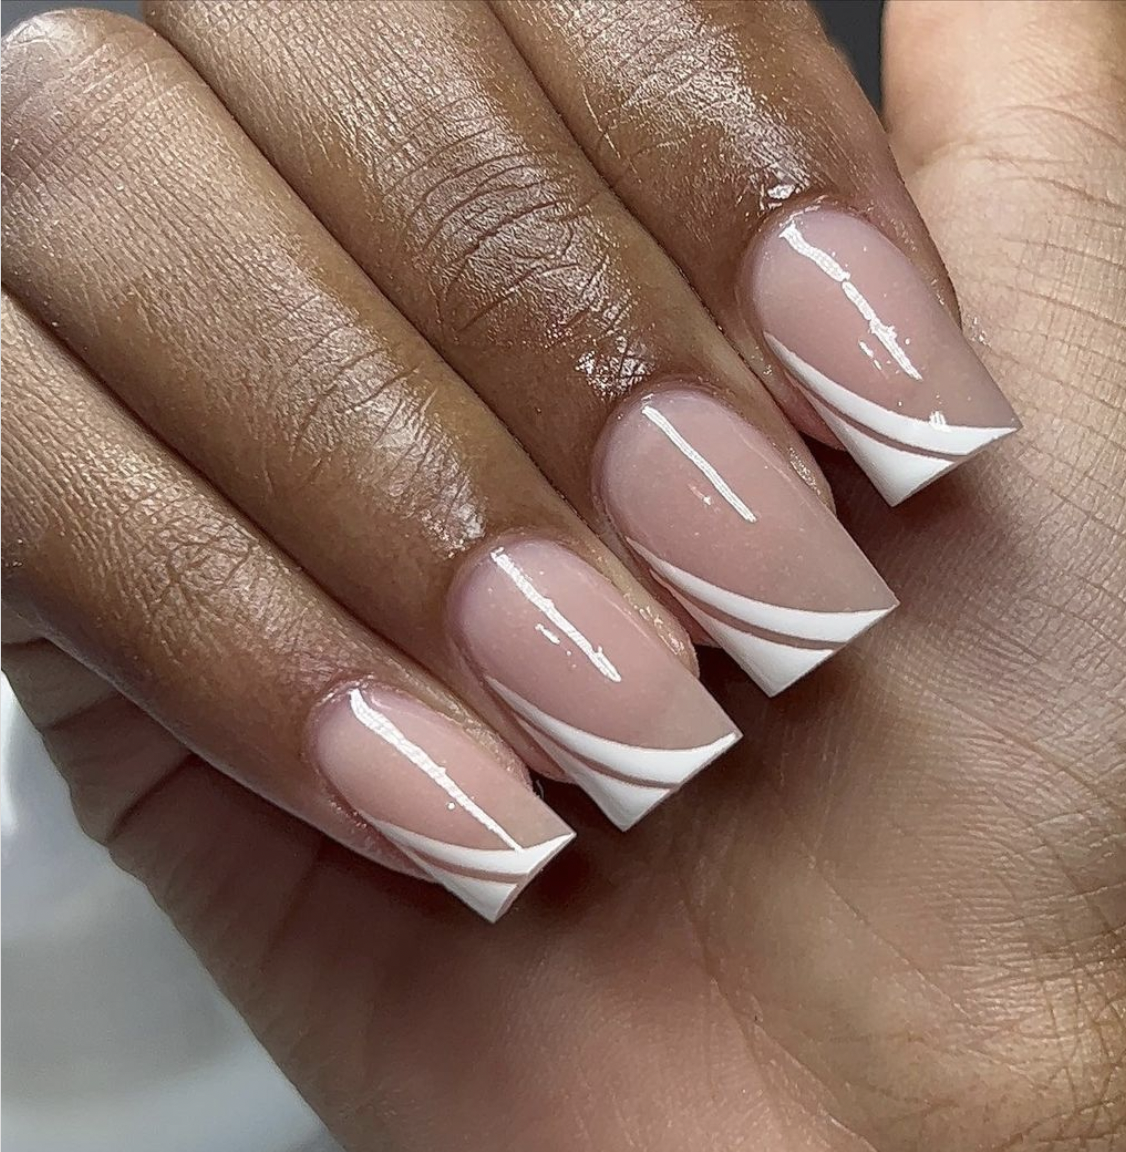 Nails With French Tip Design Idea | ArticleCube